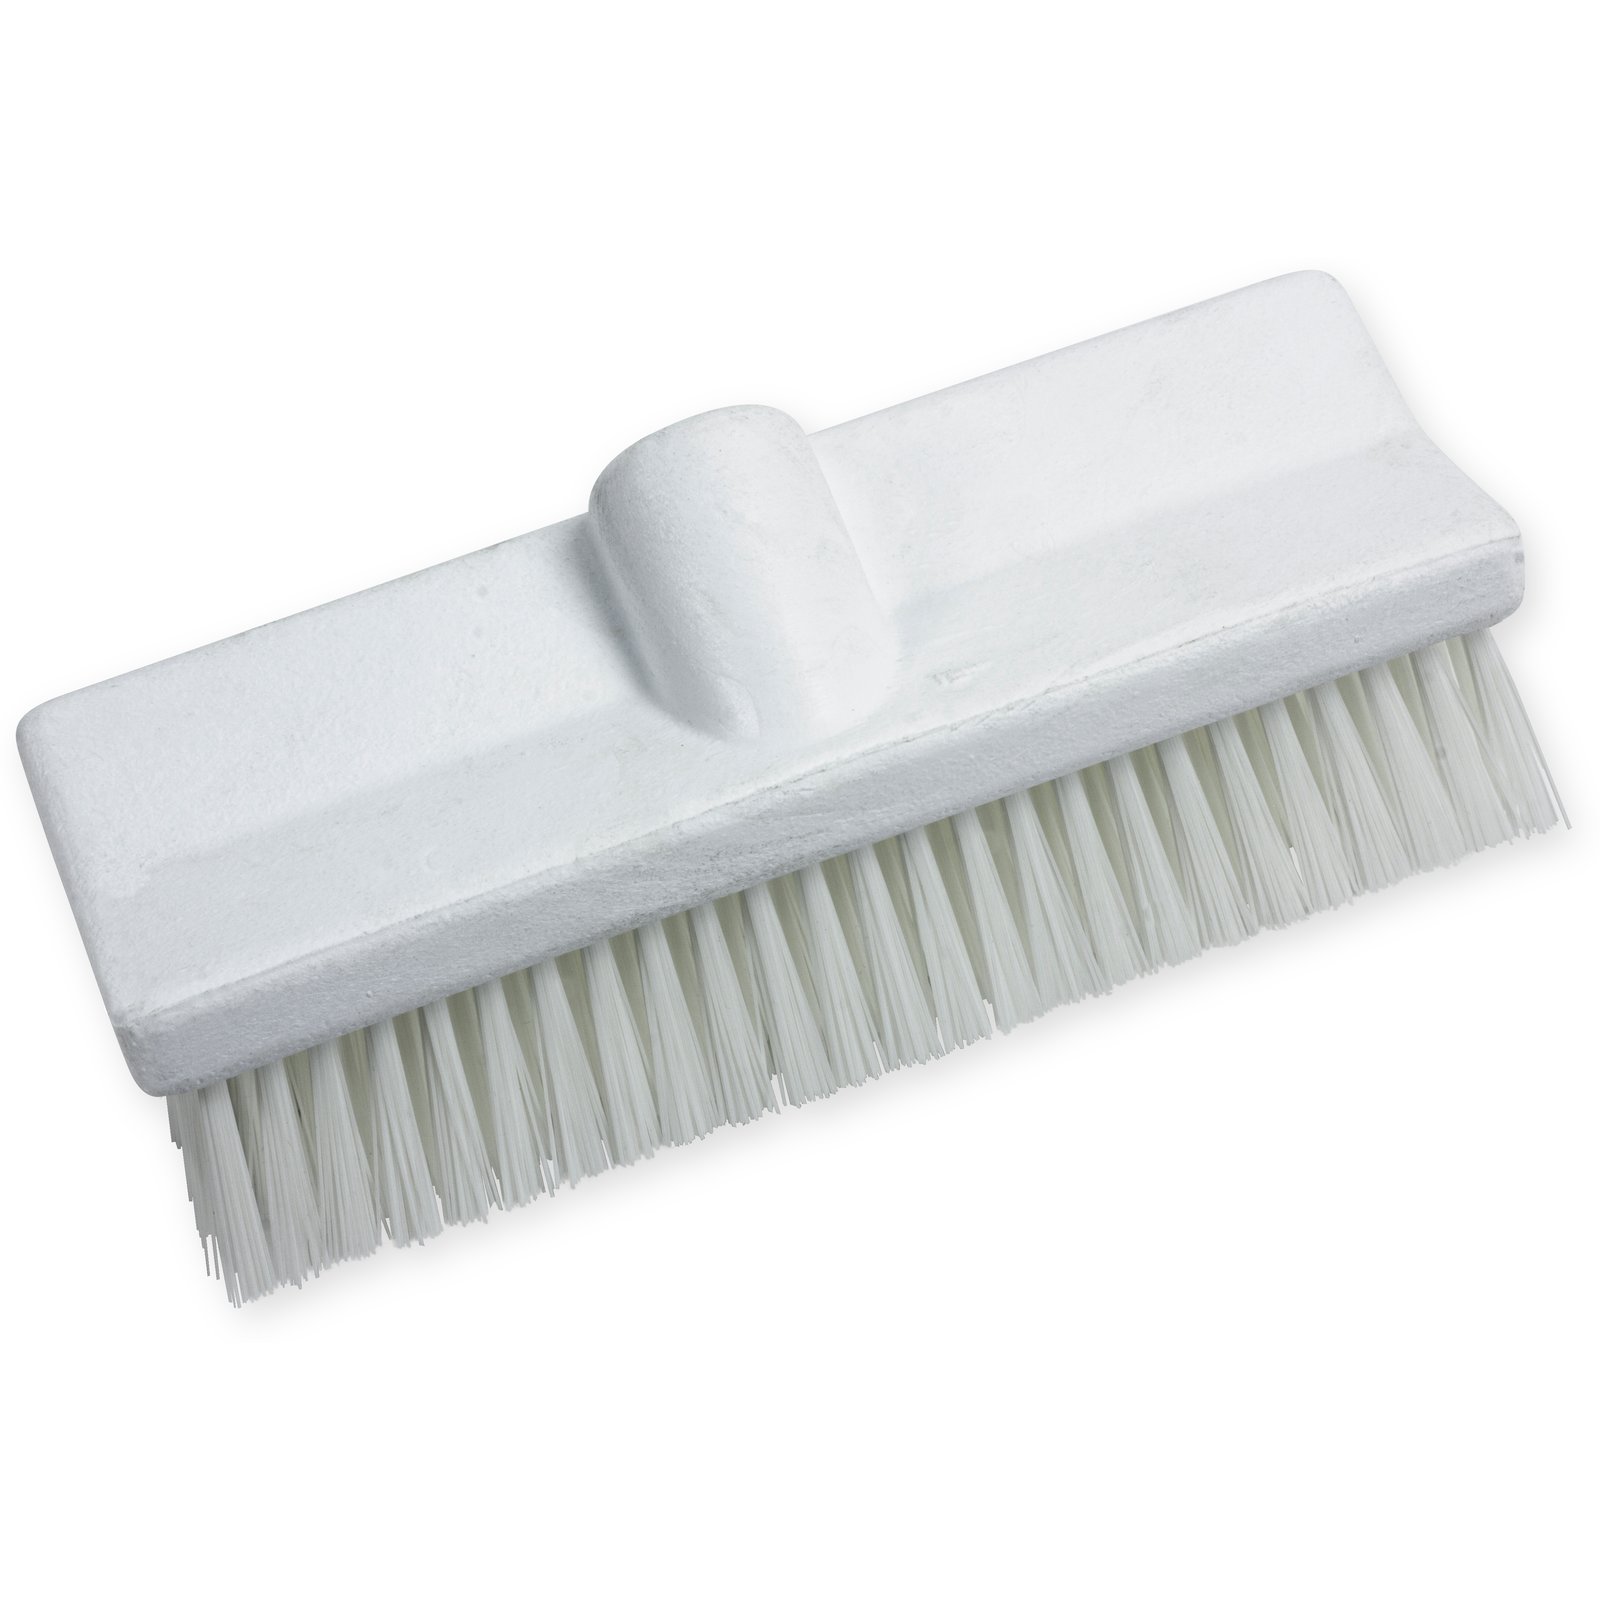 Tile and Grout Brush with Acme Threading, Black/White